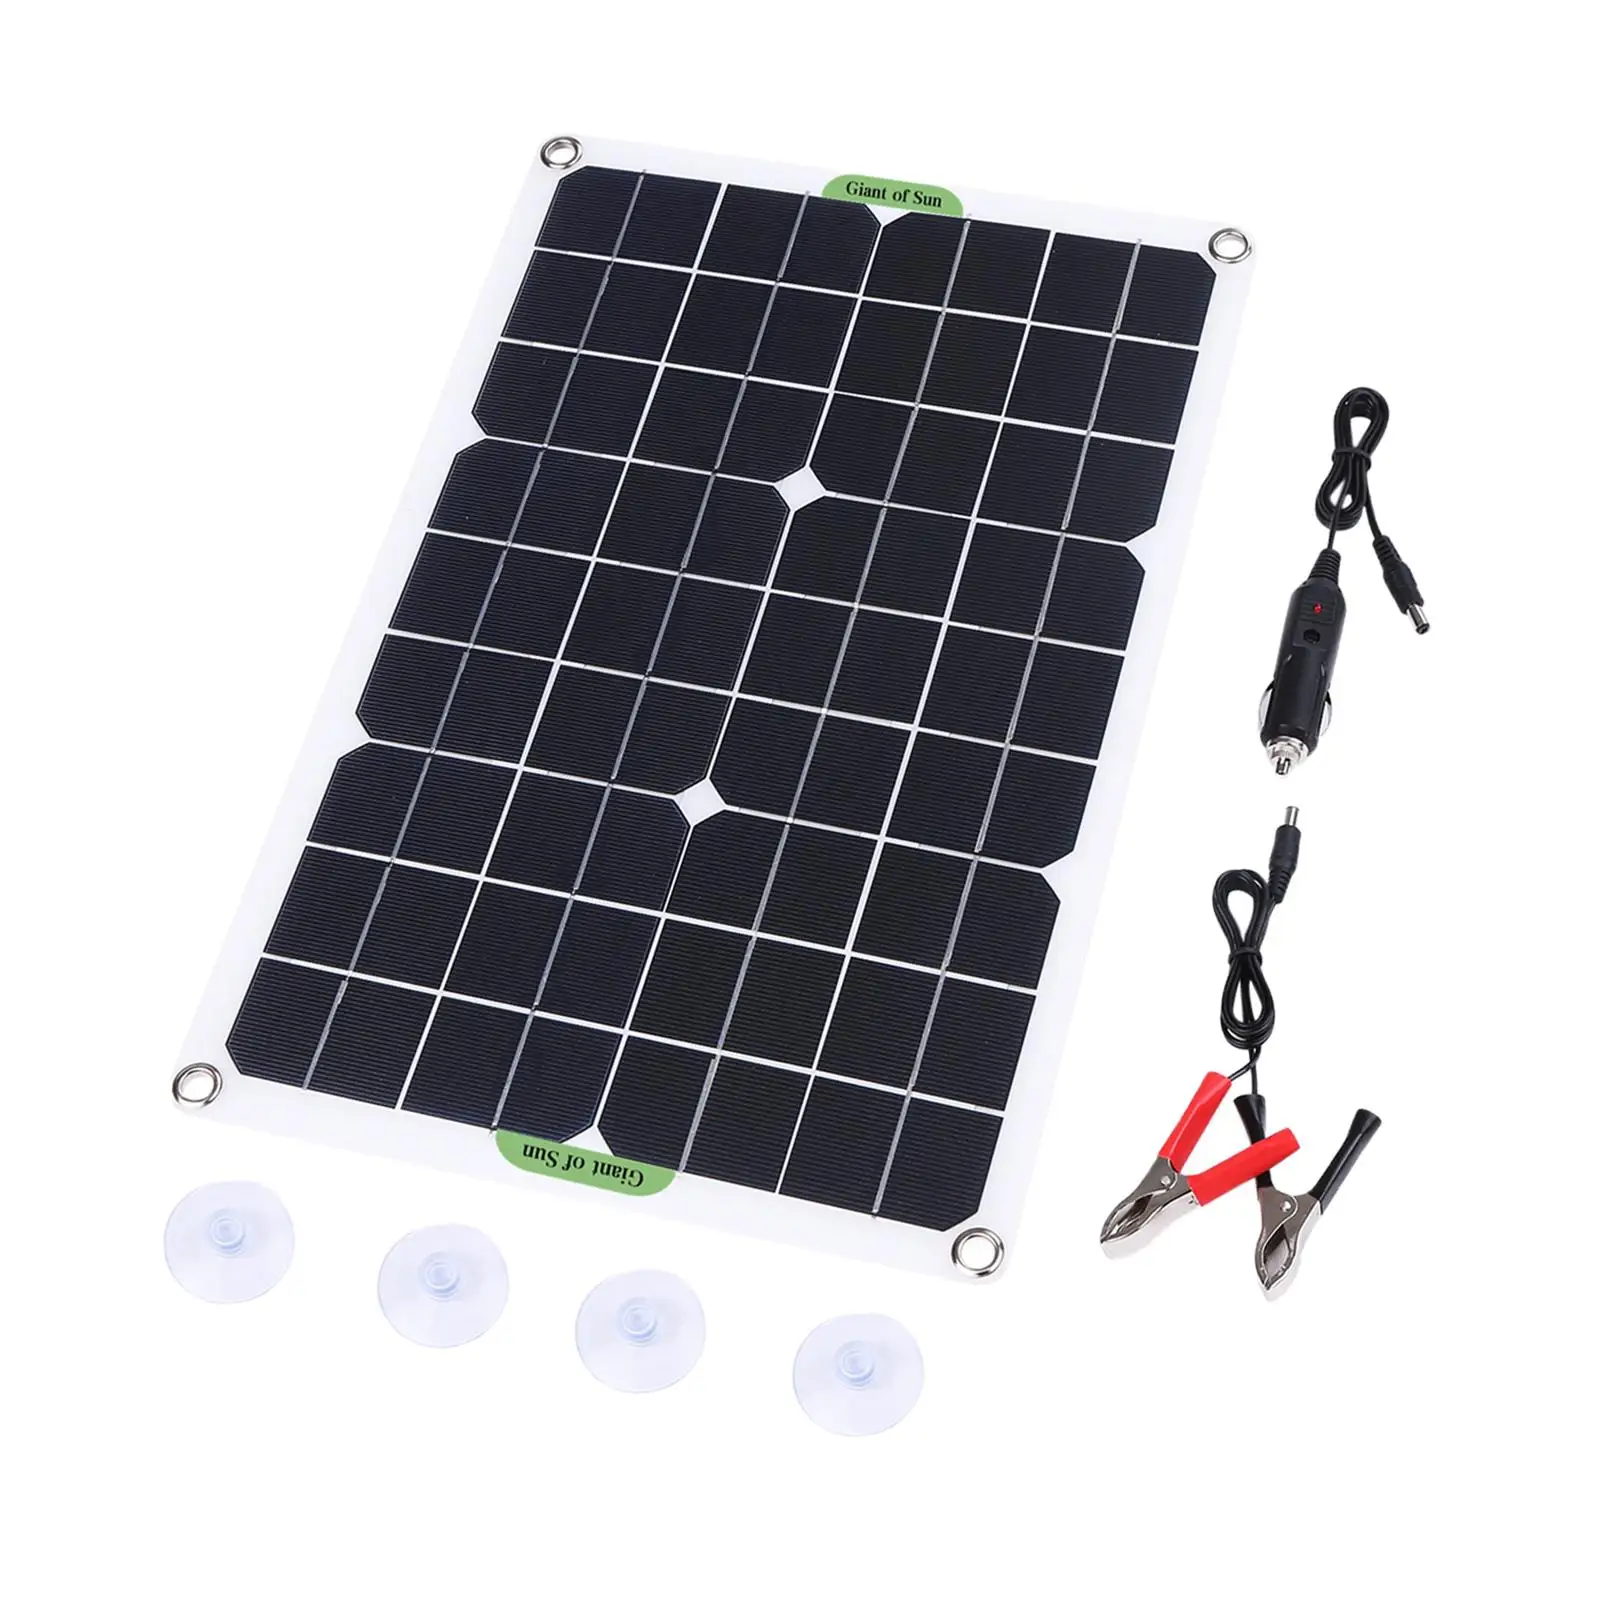 20W Solar Panel Kit Alligator Clip Cable Solar Charge RV Marine Connector Cable for Hiking Motorcycle Camera Car Battery Picnic